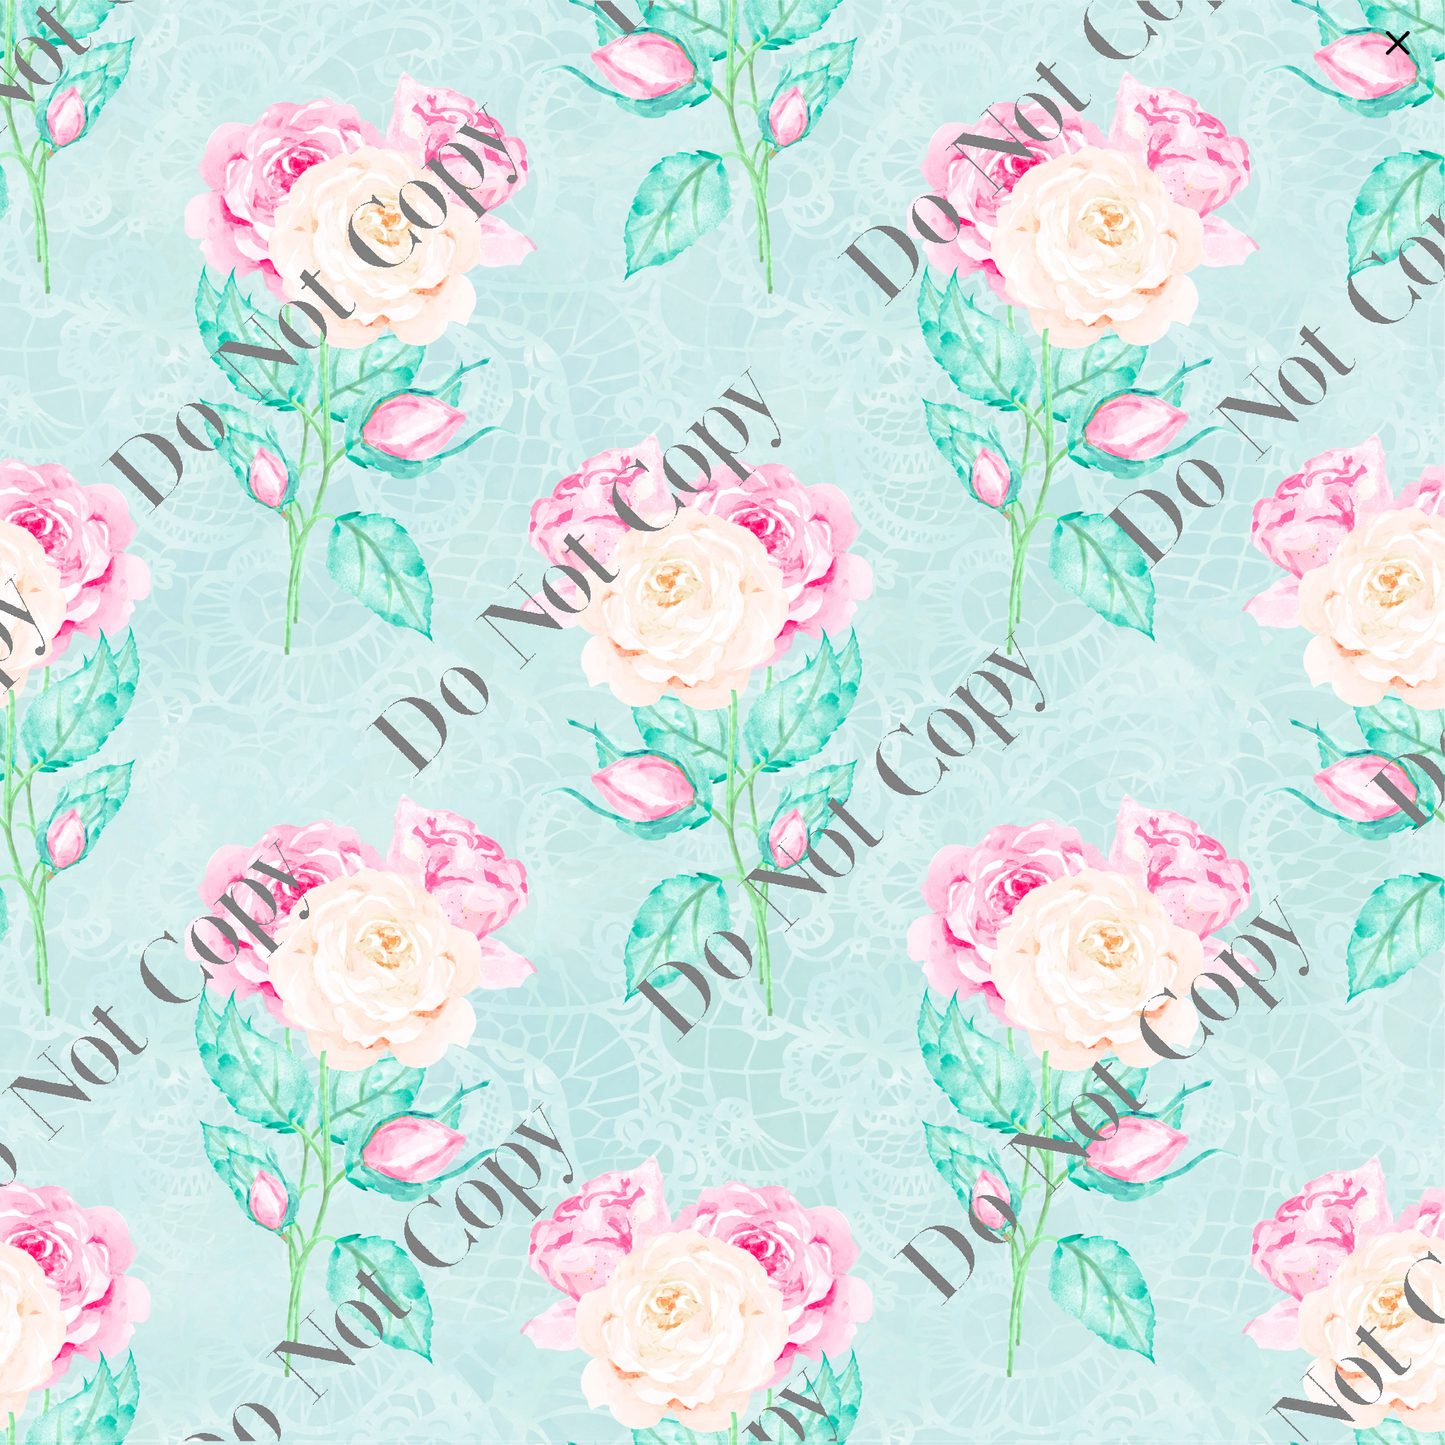 Patterned Vinyl - Pink and Peach w/ blue background